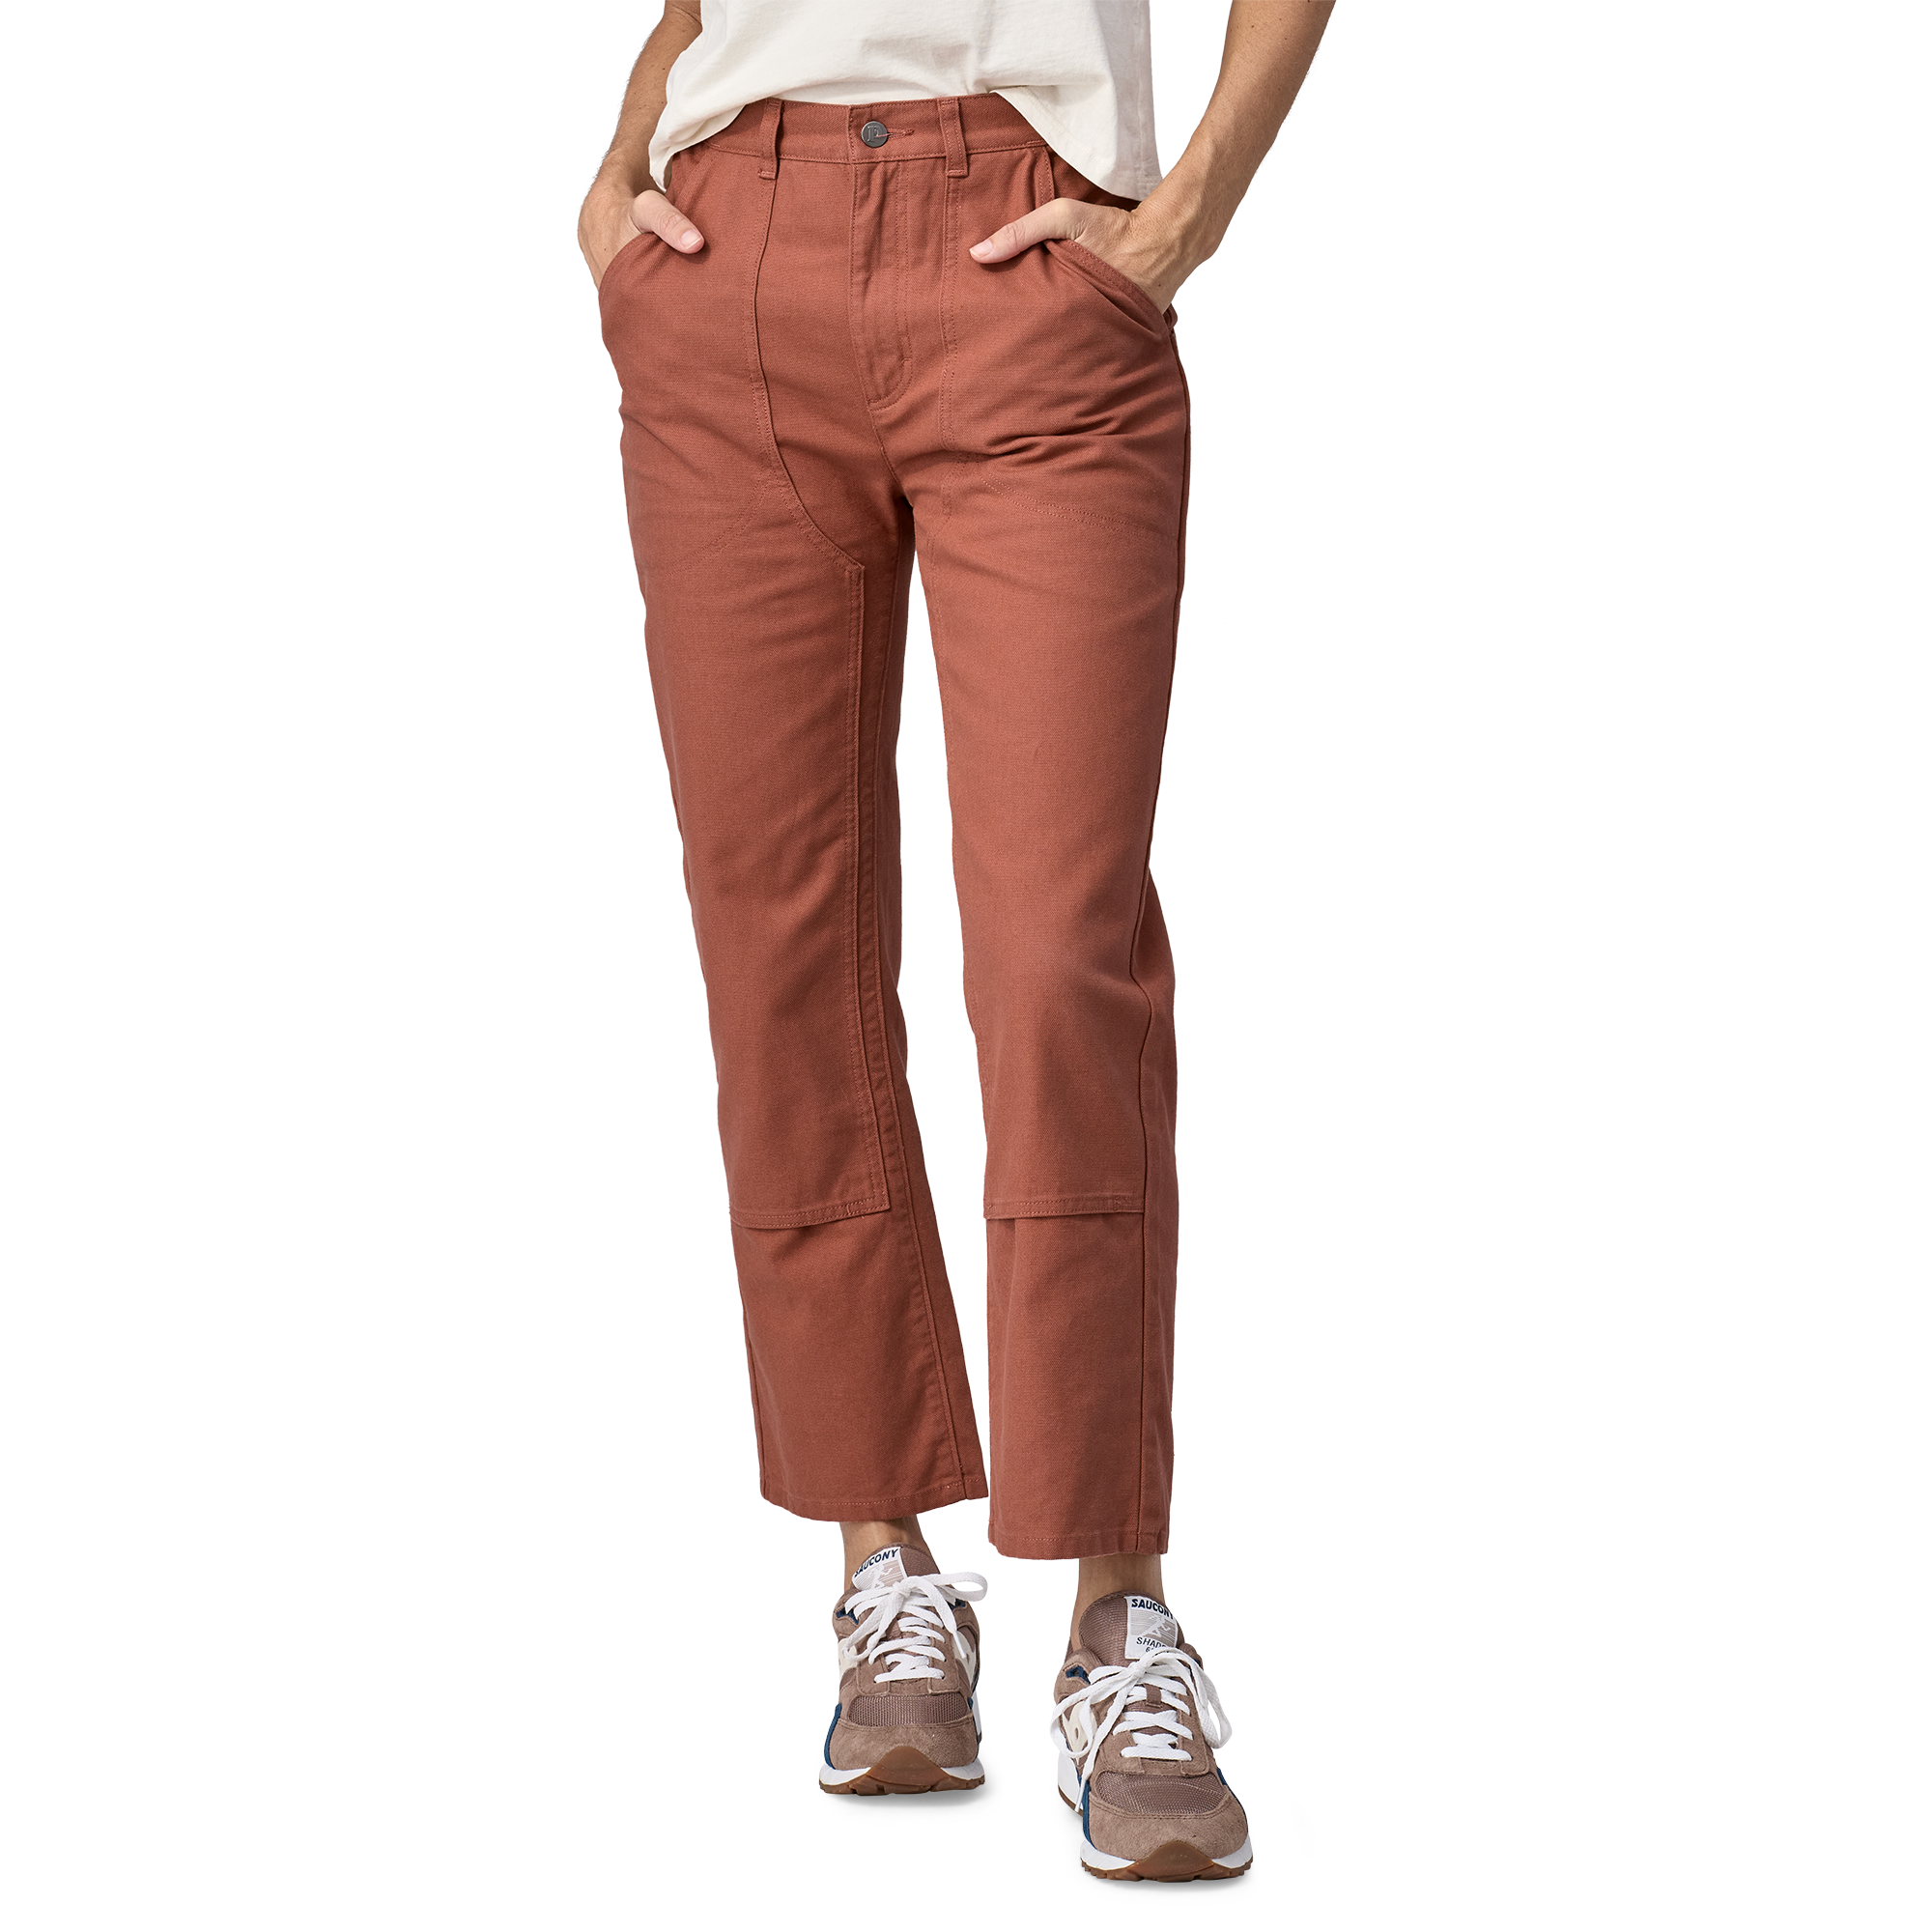 Patagonia Women's Heritage Stand Up® Pants